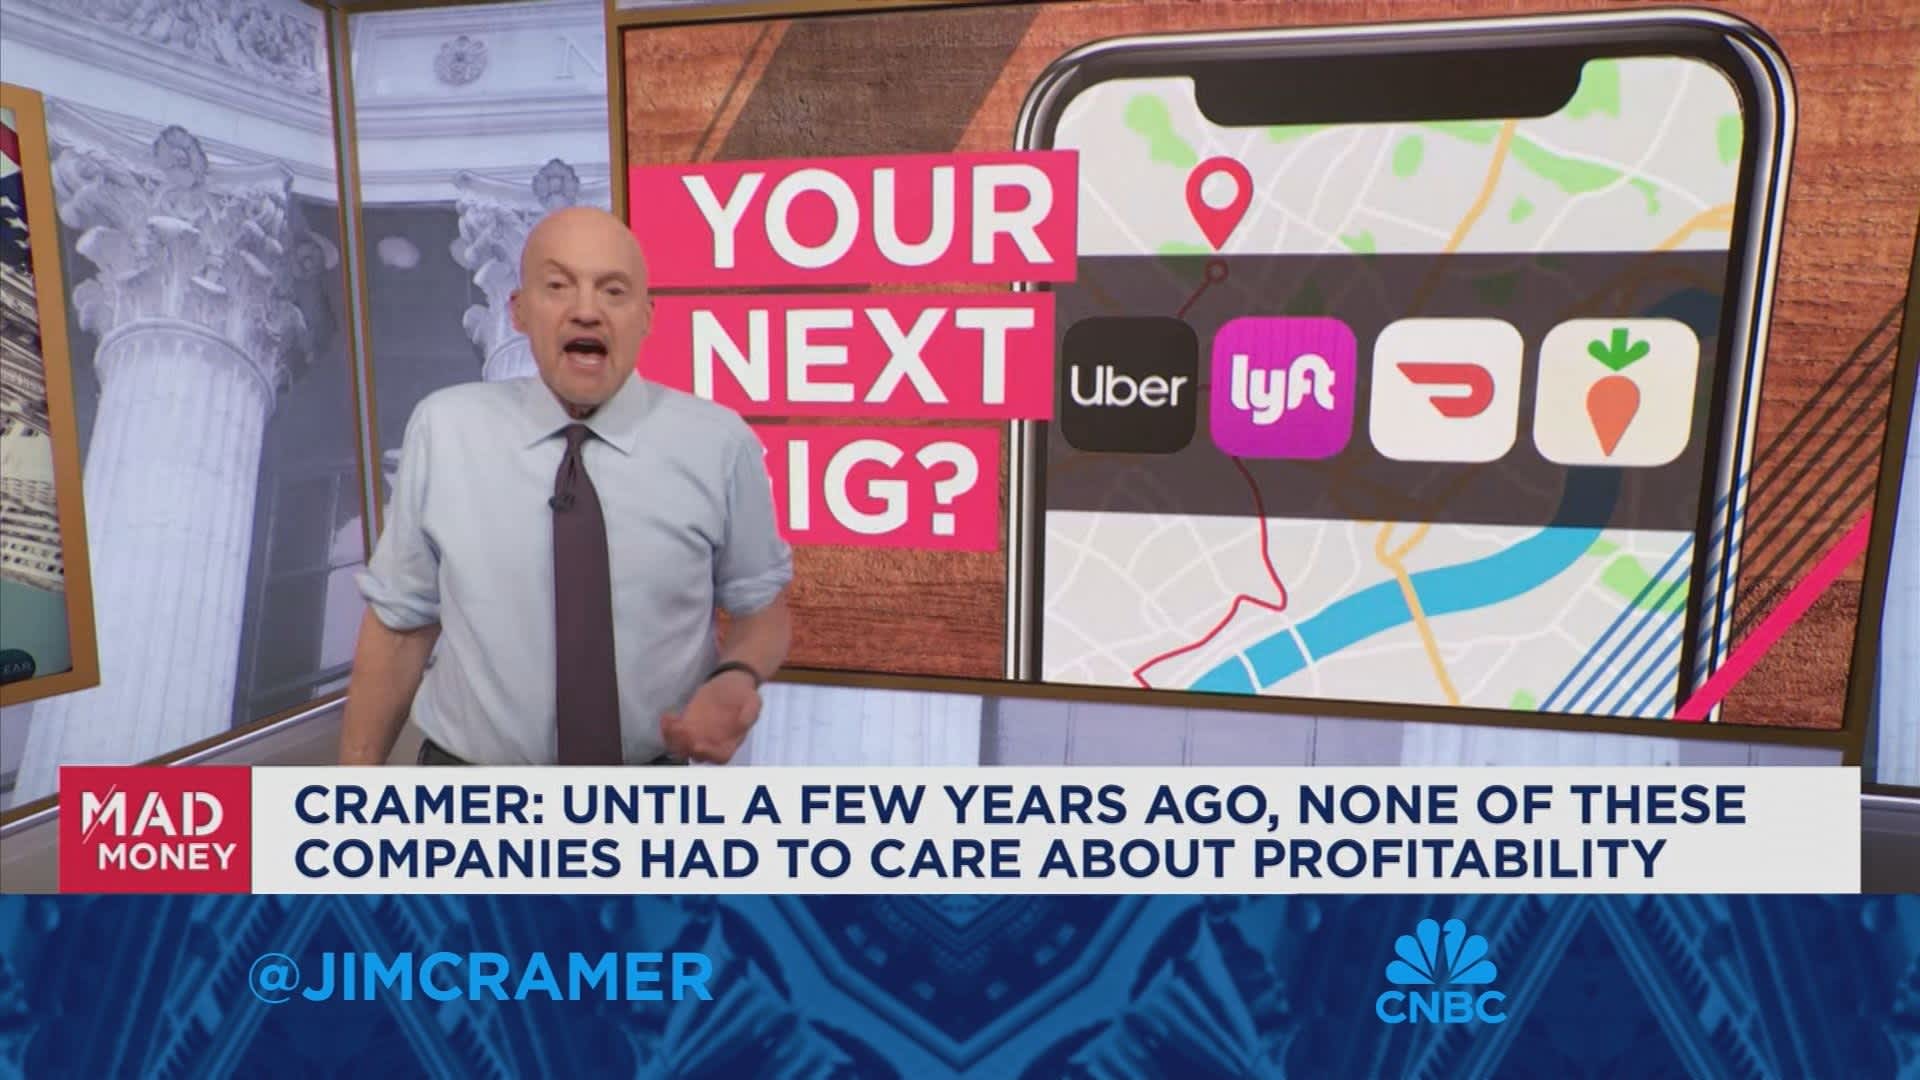 Until a few years ago gig companies did not have to care about profitability, says Jim Cramer [Video]